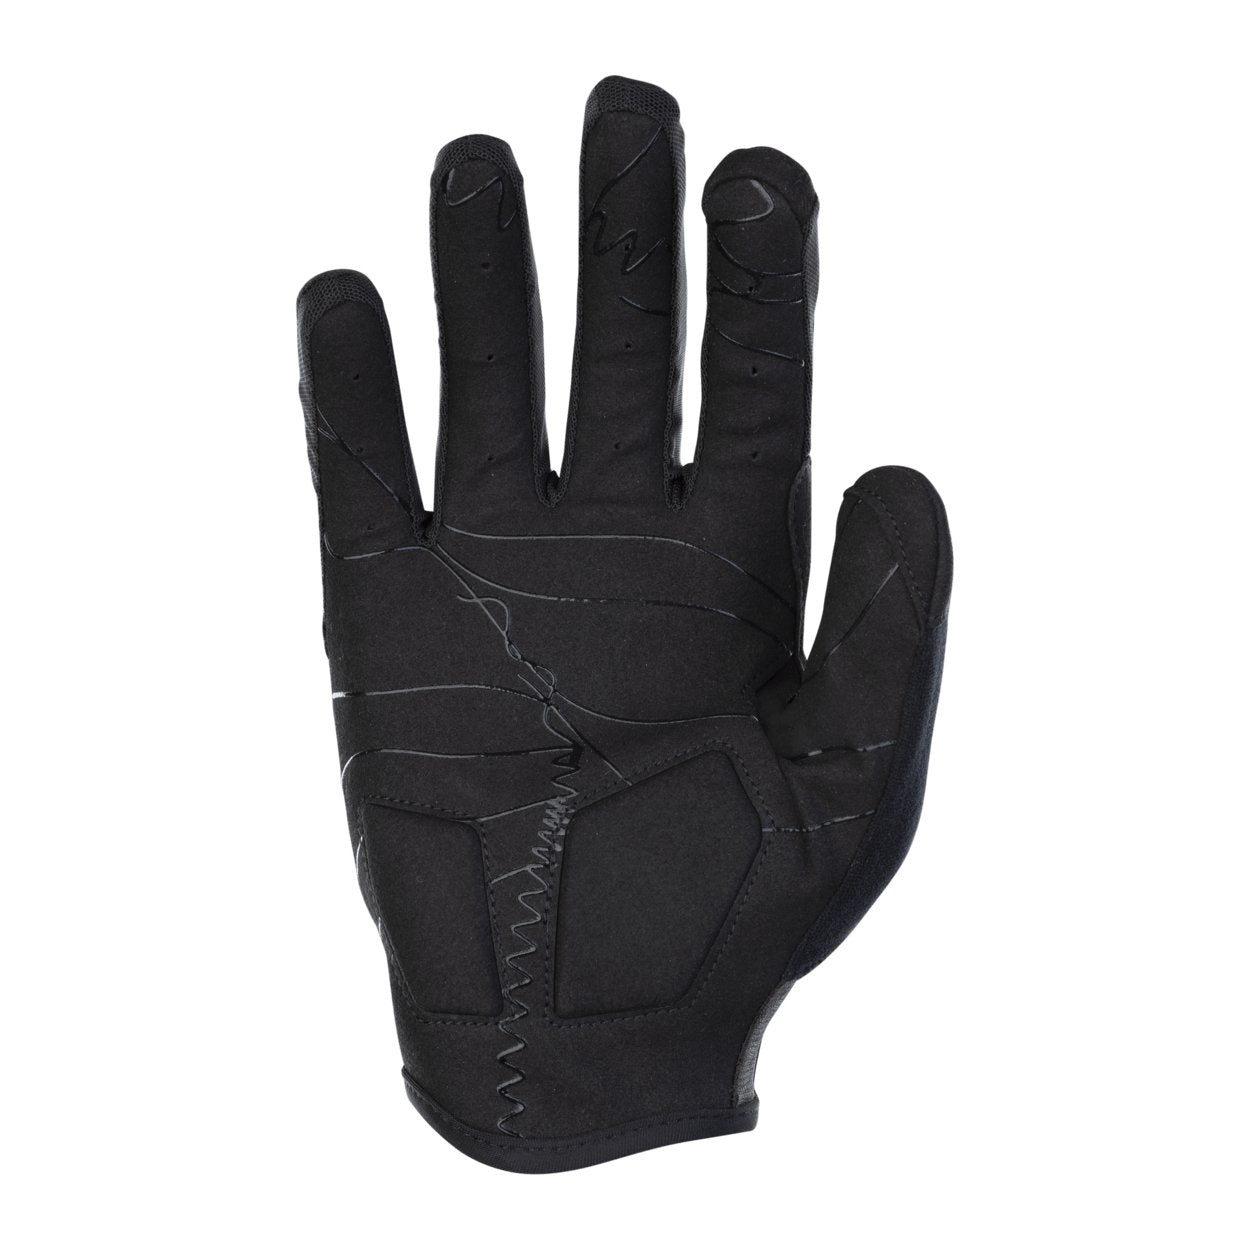 ION MTB Gloves Traze Long 2024 - Worthing Watersports - 9010583160863 - Gloves - ION Bike